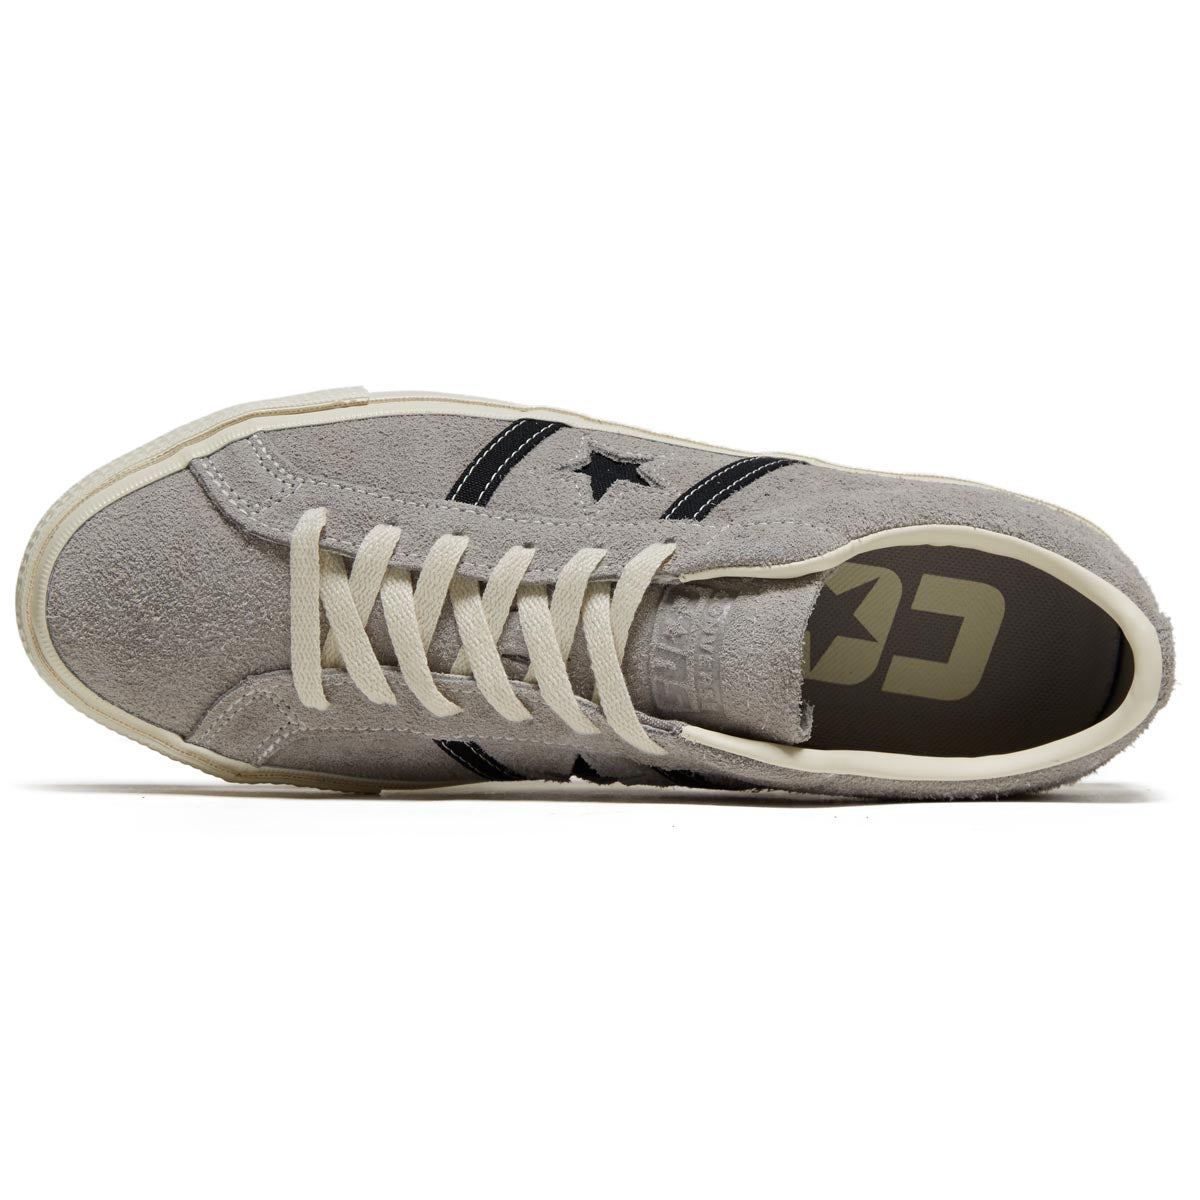 Converse One Star Academy Pro Shoes - Totally Neutral/Black/Egret image 3